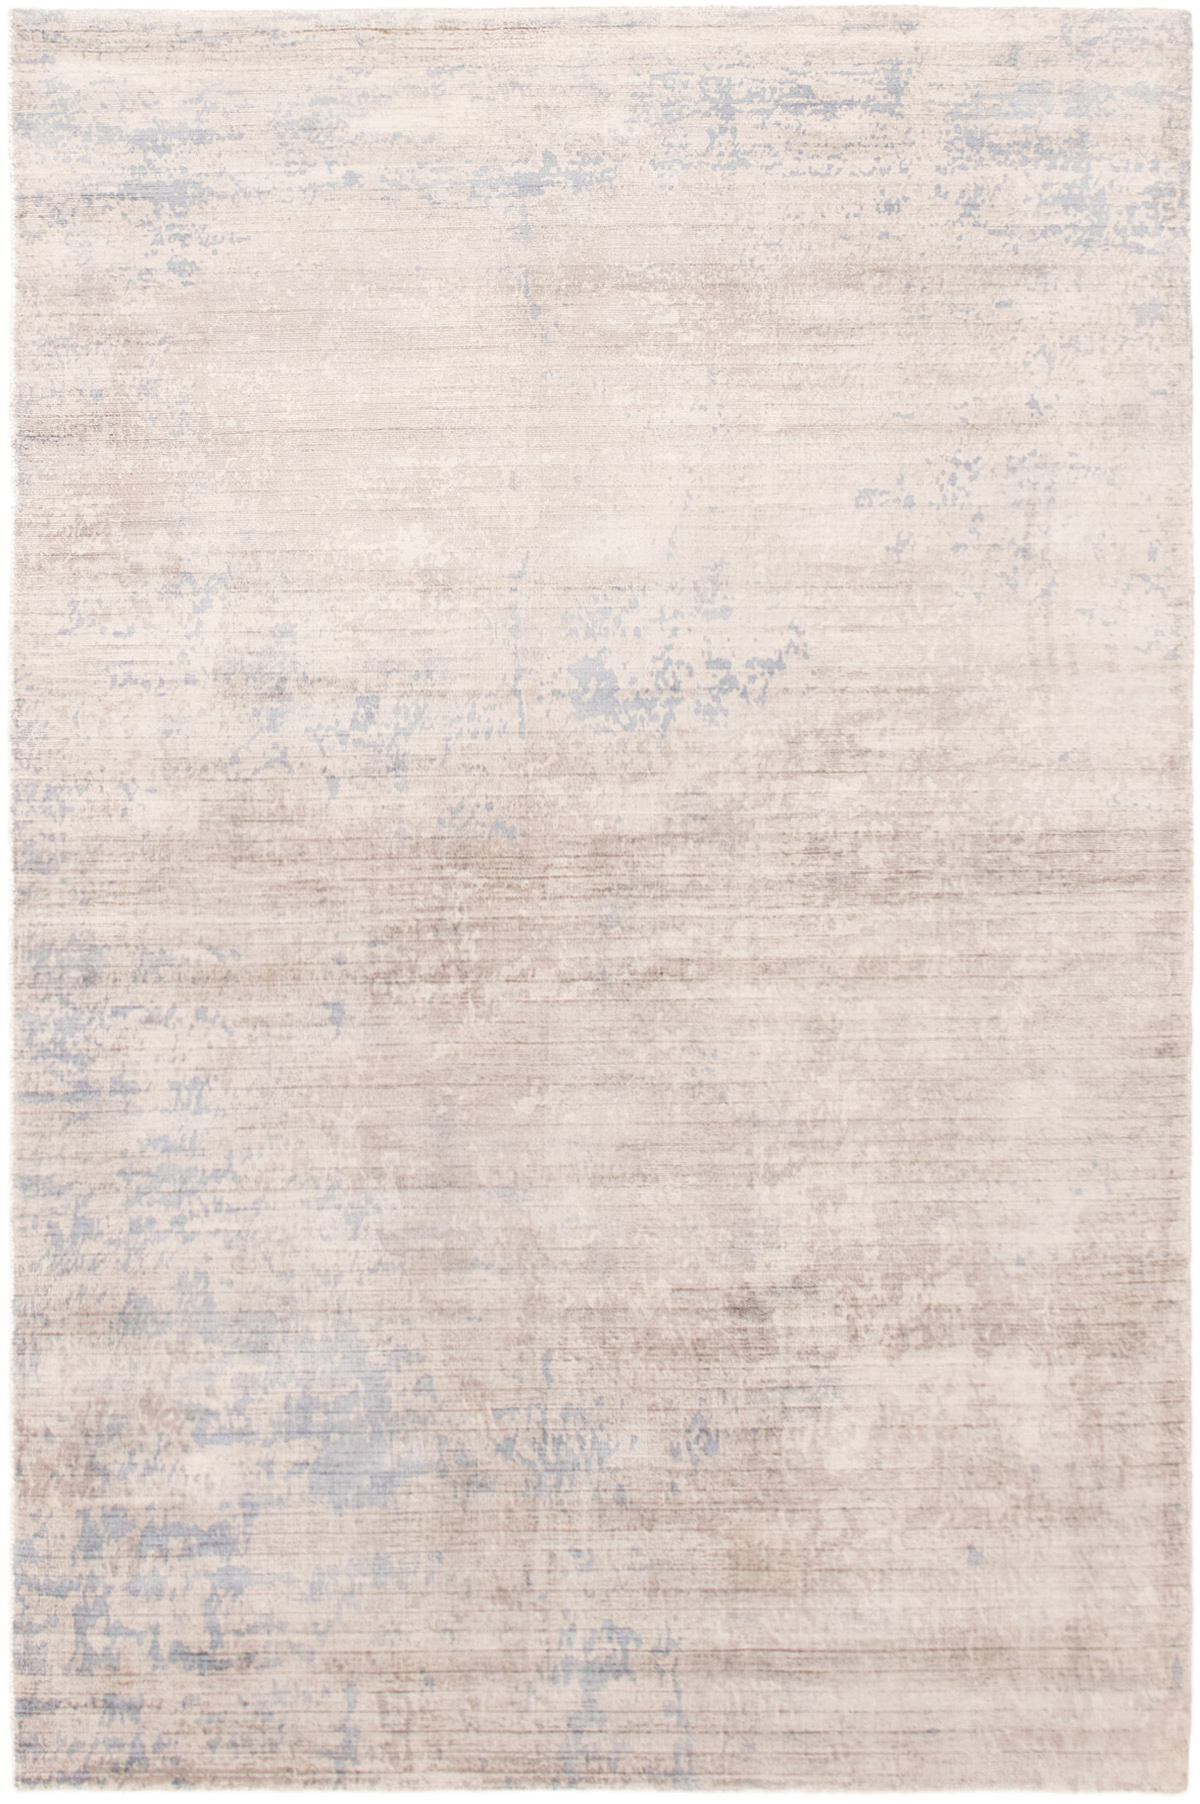 Hand-knotted Galleria Light Grey Viscose Rug 4'11" x 7'6" Size: 4'11" x 7'6"  